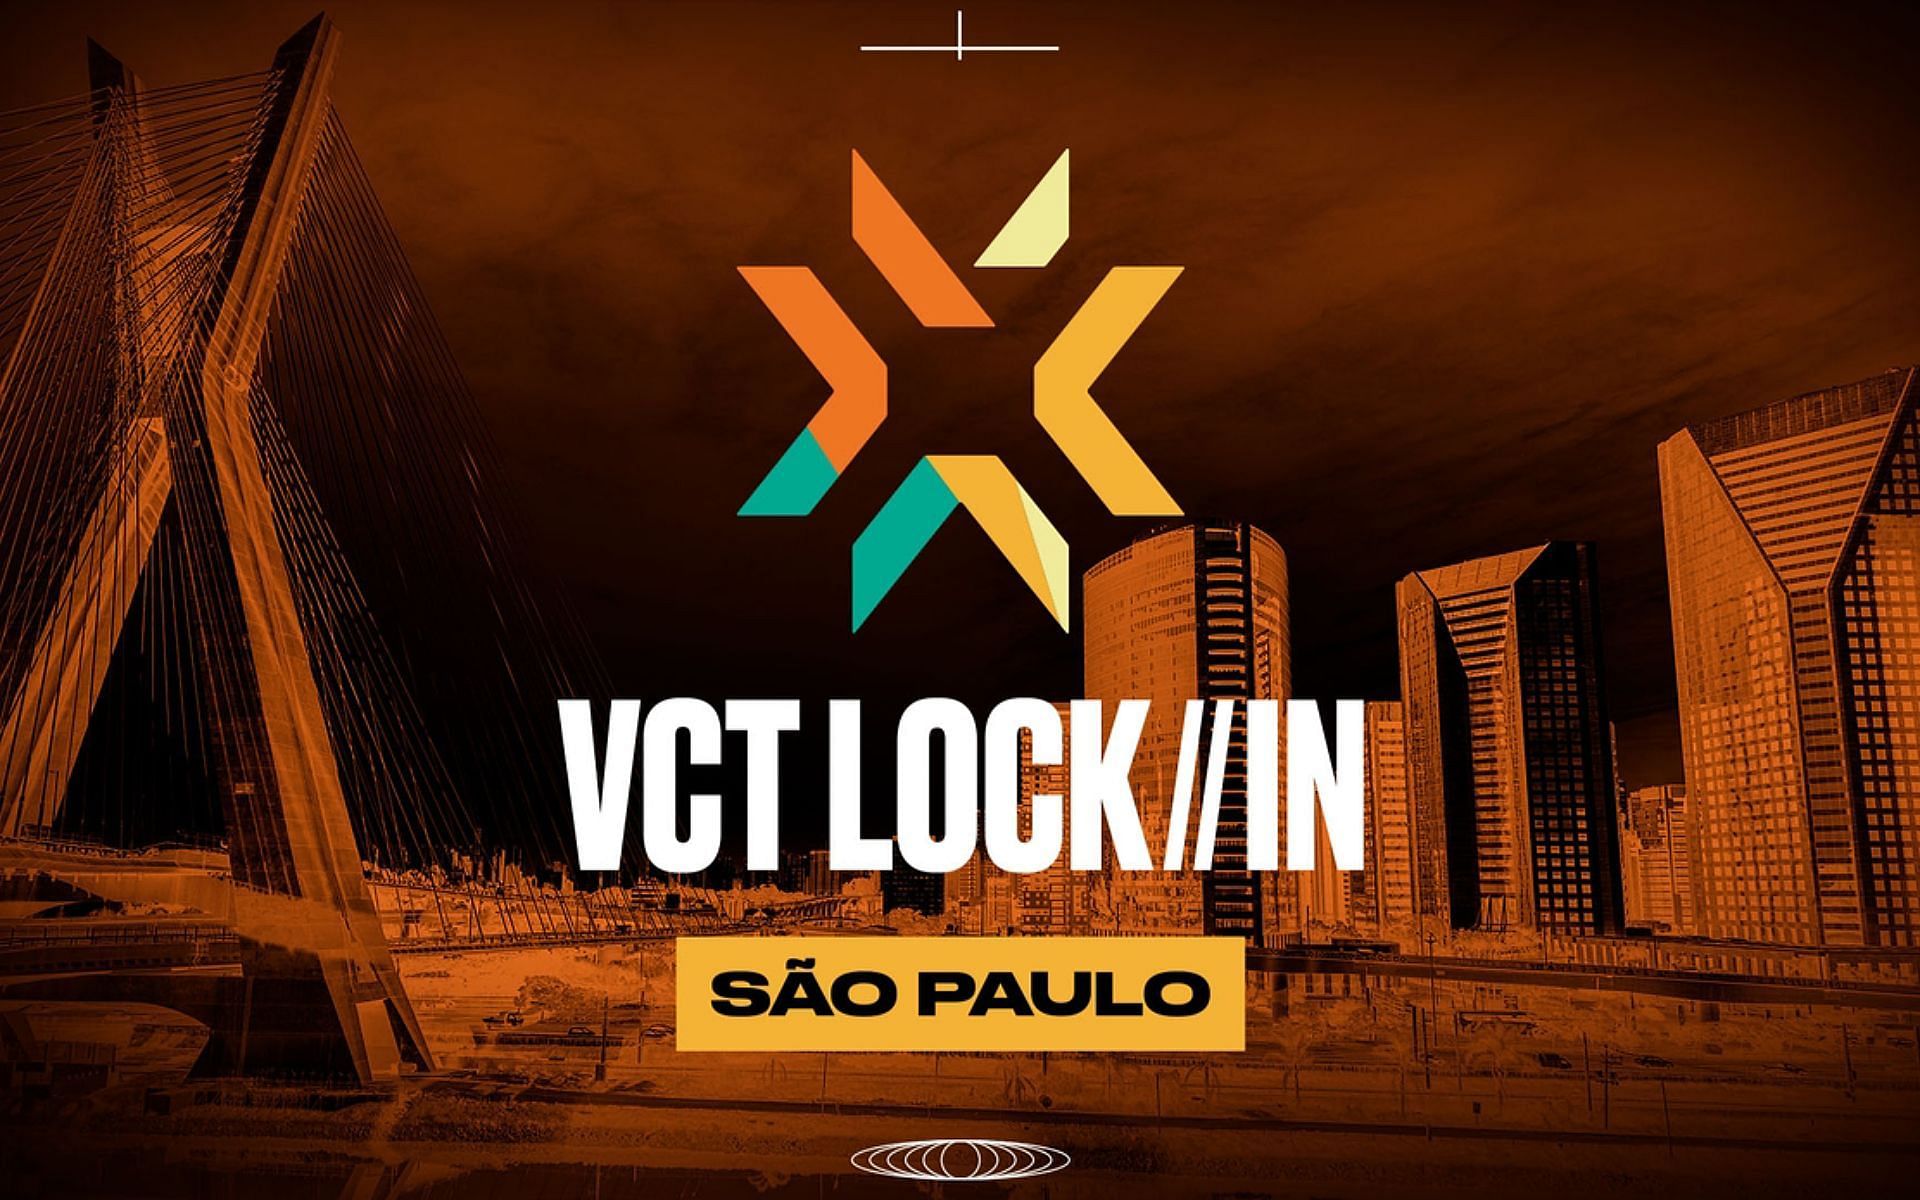 VCT LOCK//IN Brazil 2023 tickets How to buy, official prices, and more